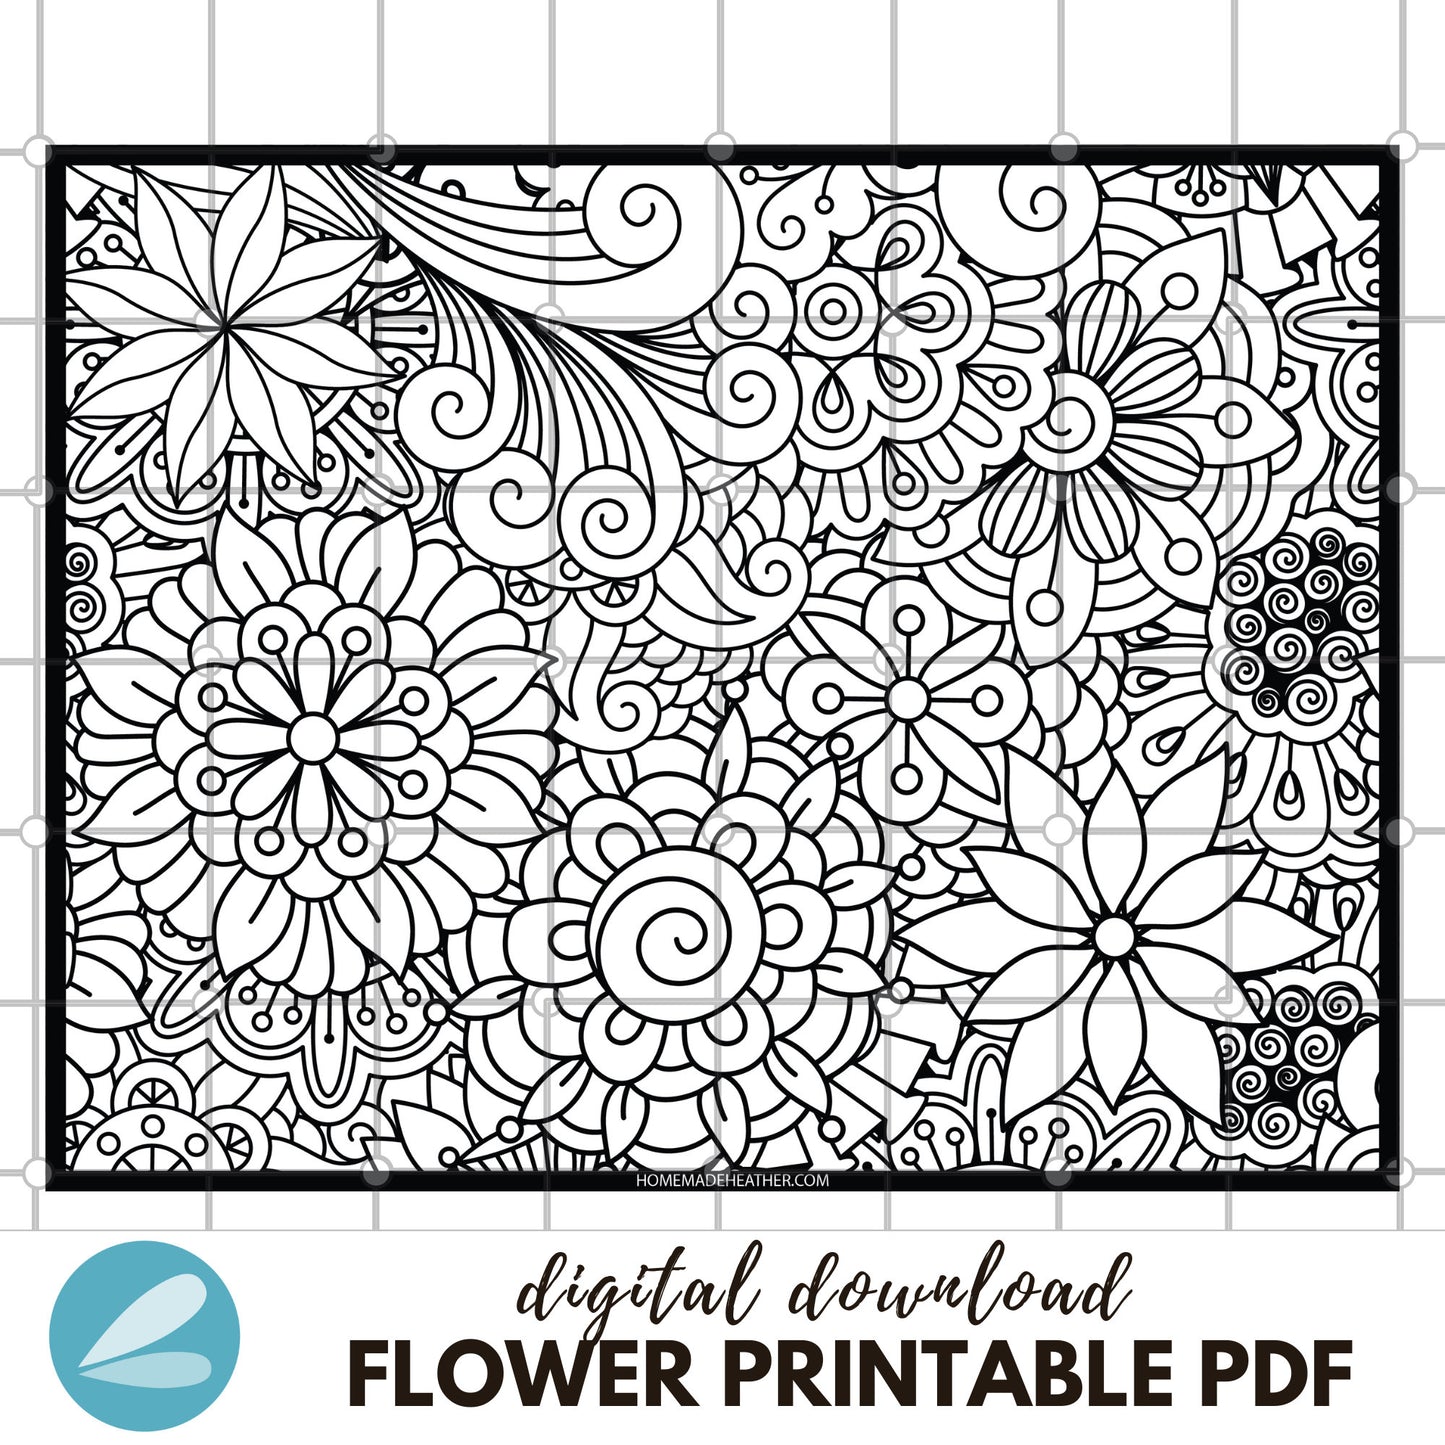 Flower Printable Coloring Pages - Flower Coloring Sheets PDF - Instant Download